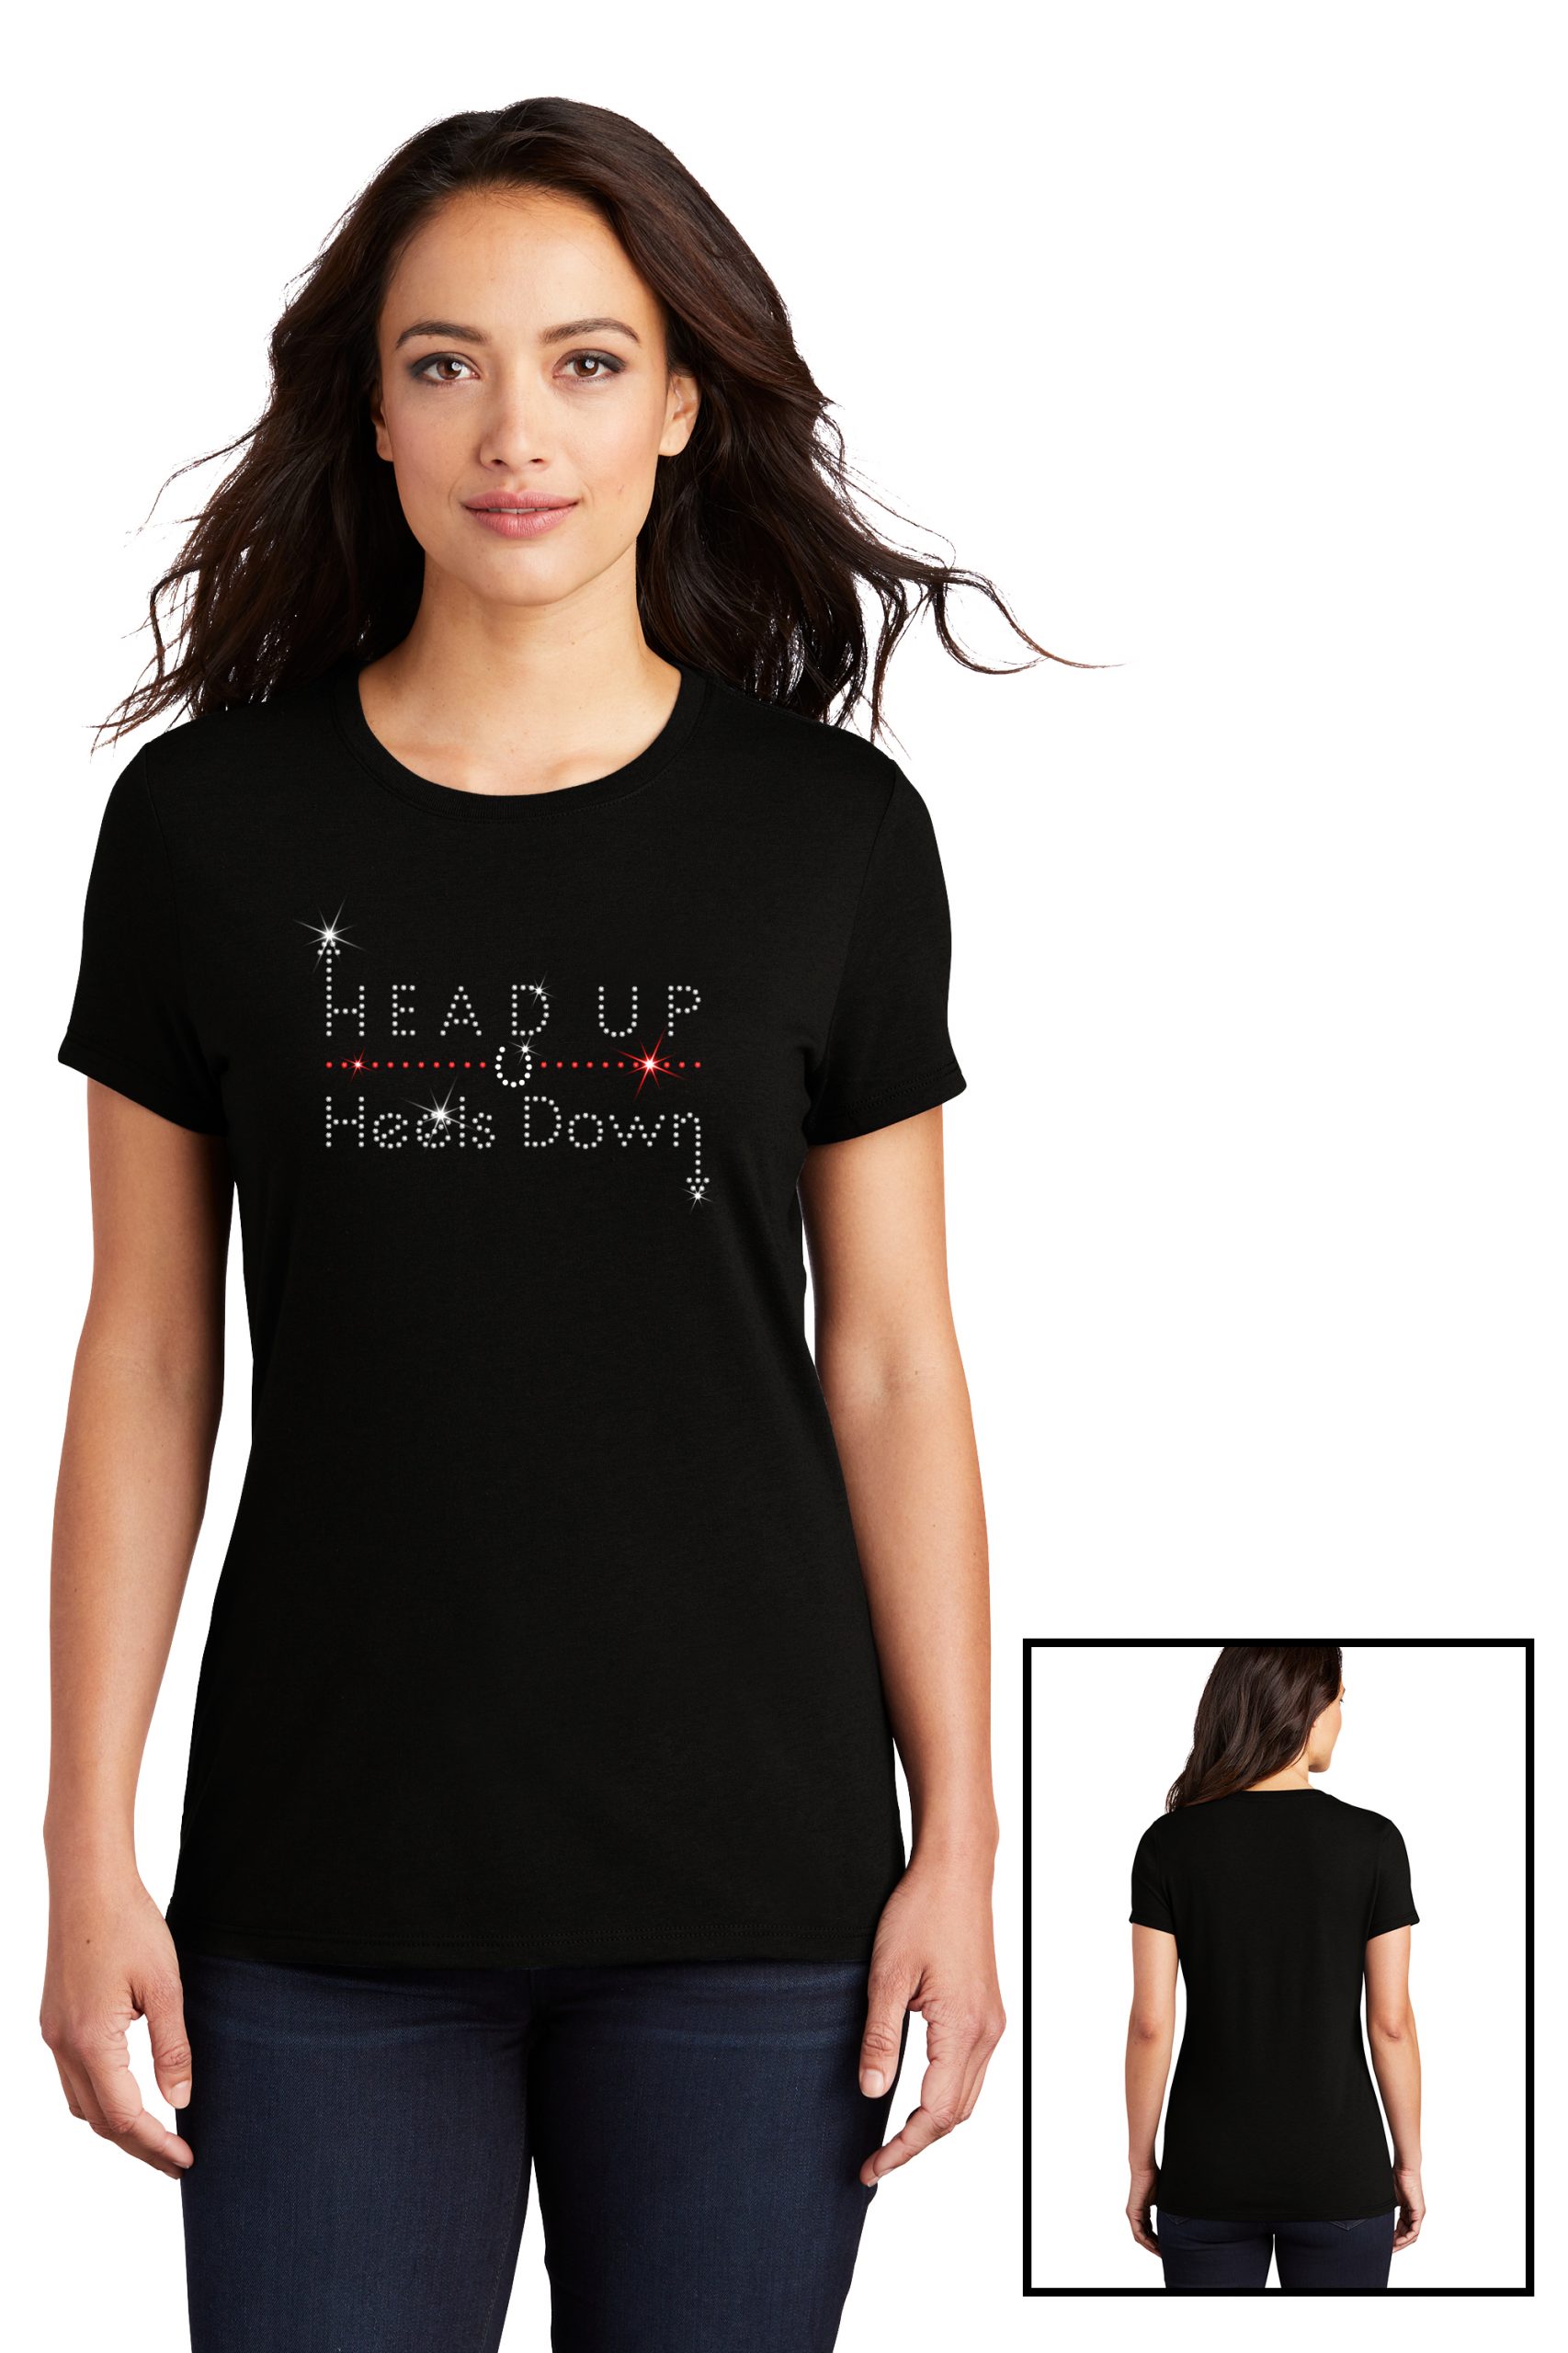 Head Up Heels Down, Horse' Lunch Bag | Spreadshirt